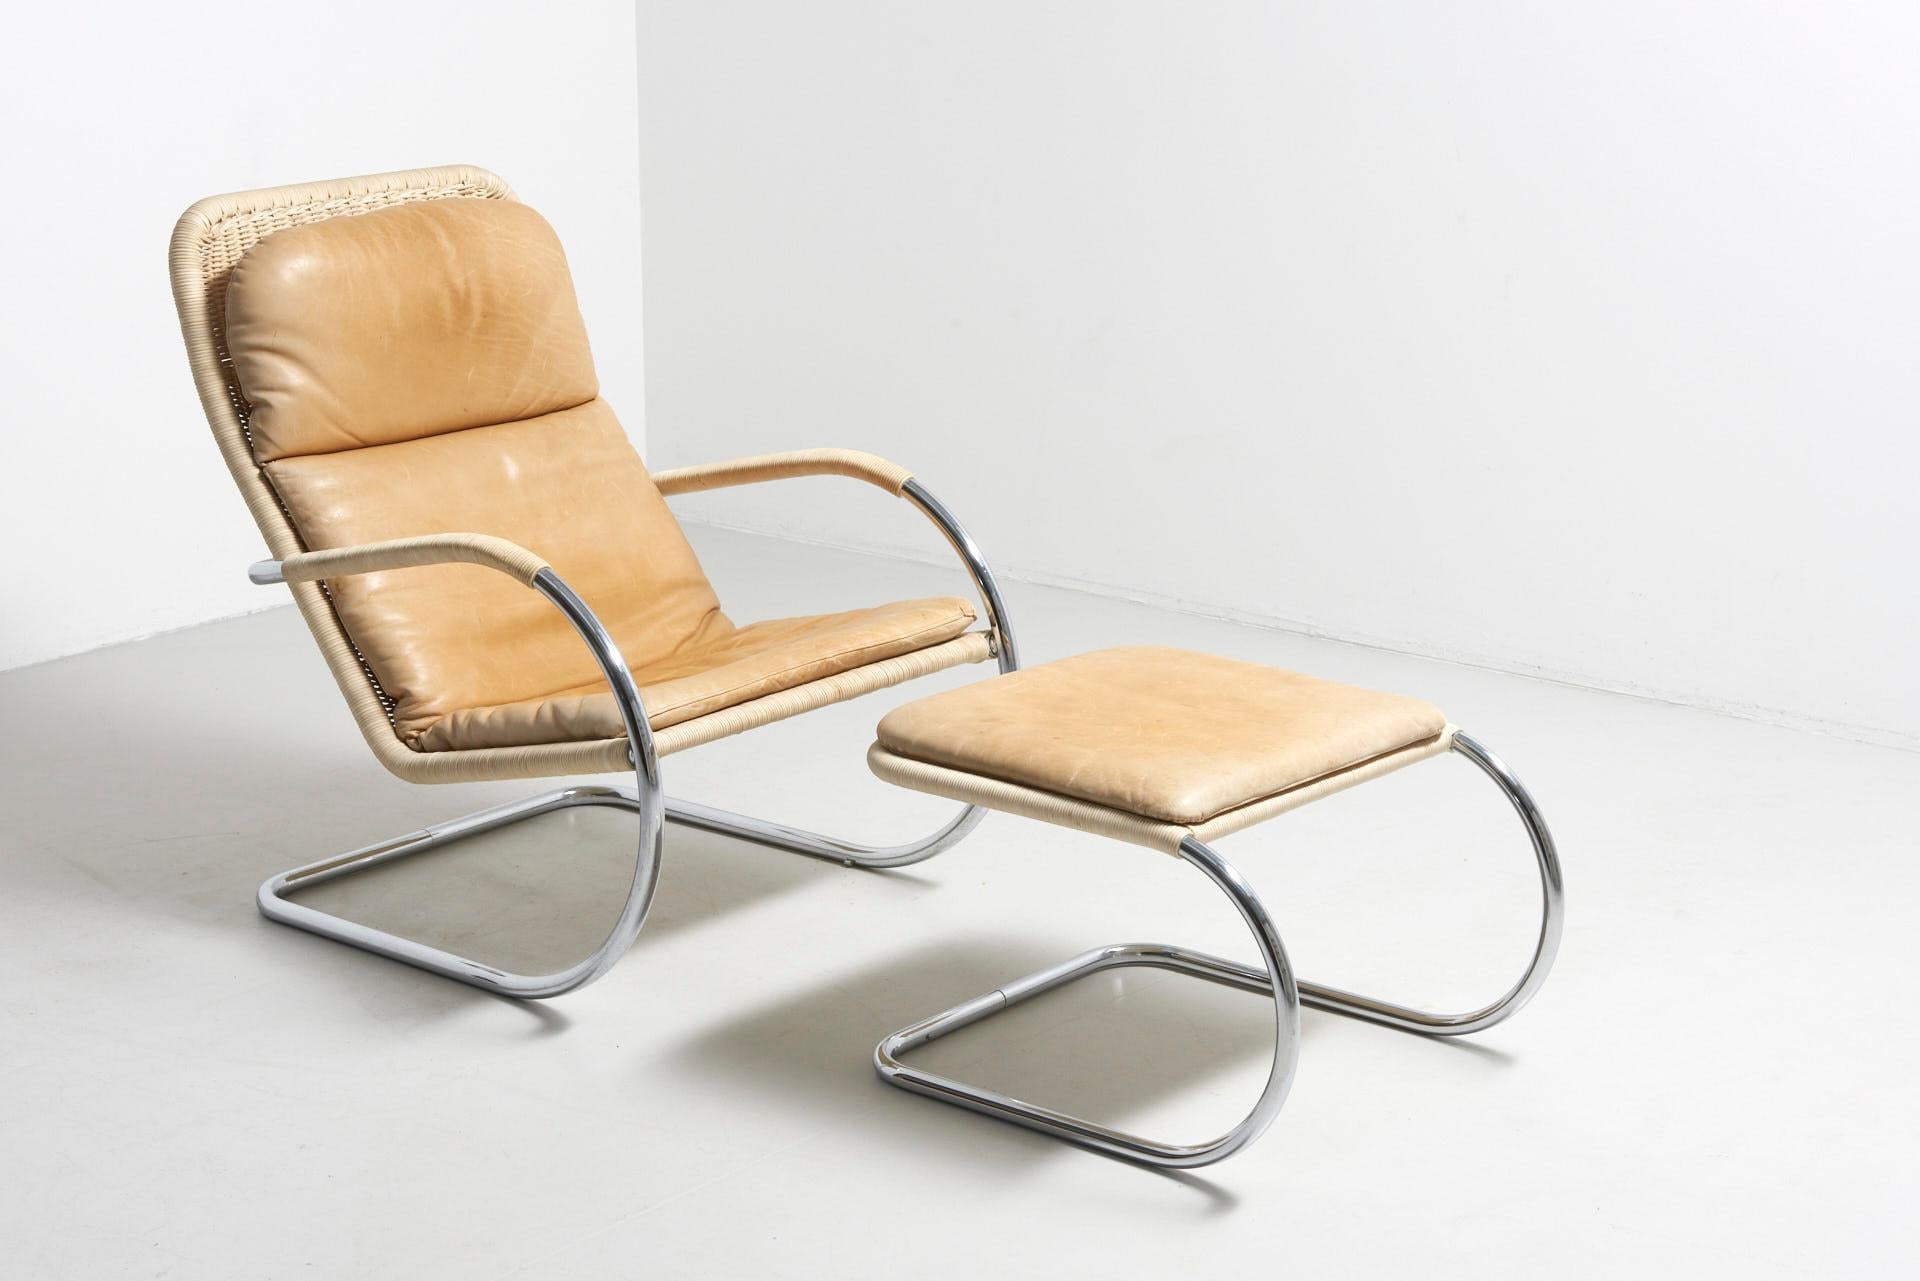 Tubular lounge chair with ottoman. This chair was originally designed in 1932 and reintroduced by Tecta in 1987. The chair´s backrest, seat and footstool base is made of woven cane on a chromed tubular steel frame. Armrest is wrapped in cane as